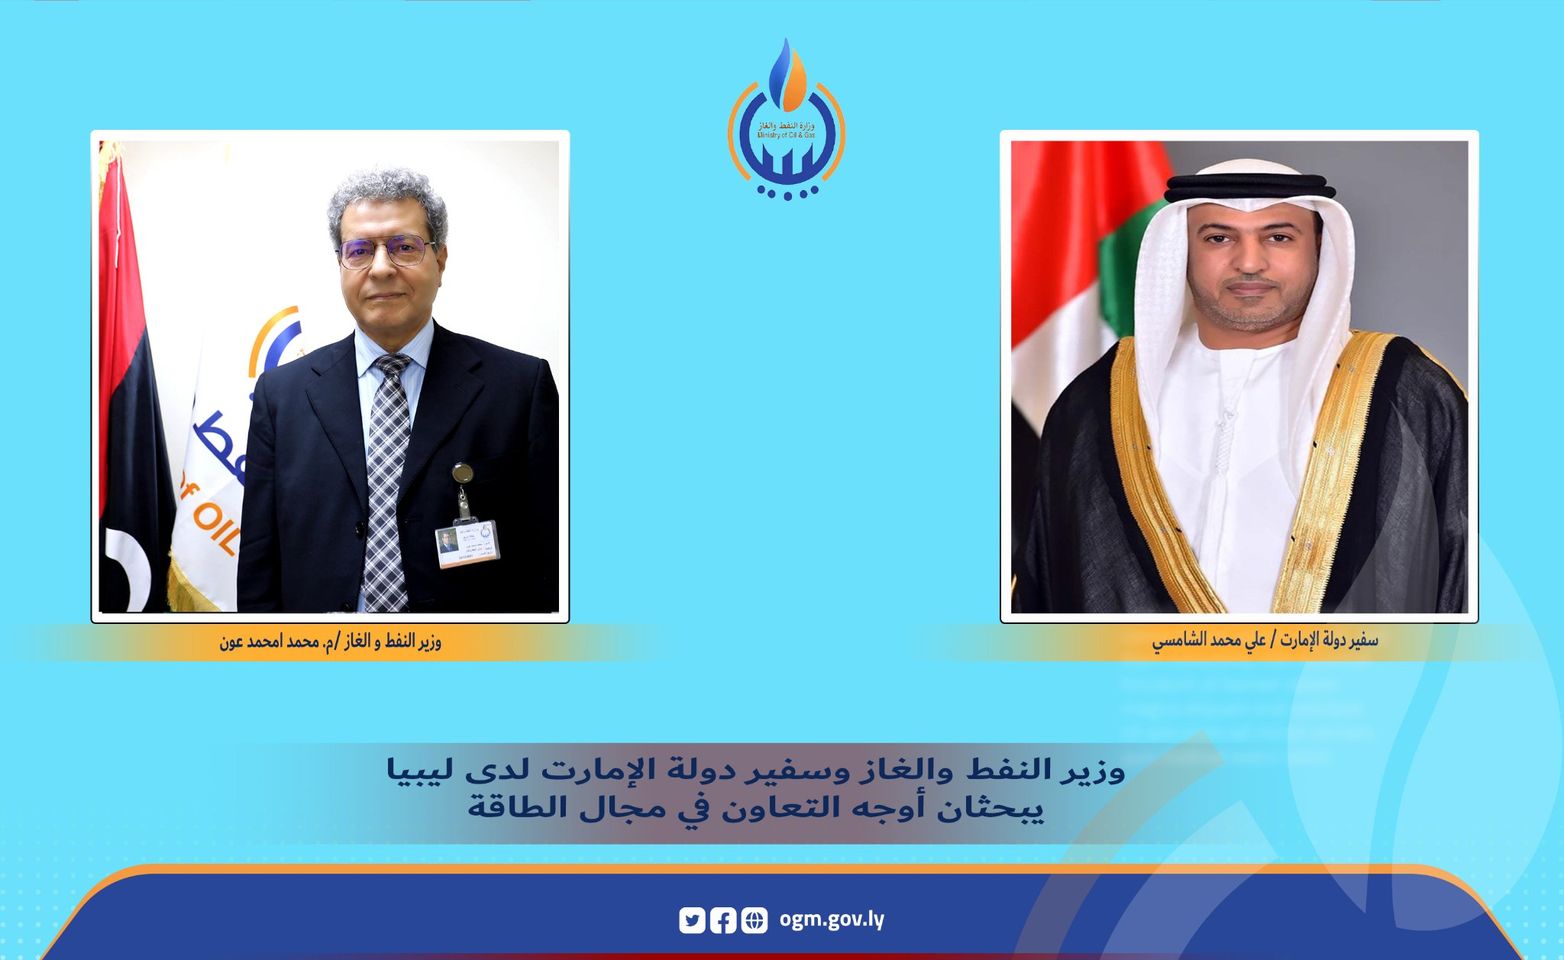 GNU Minister of Oil discusses energy cooperation with the UAE Ambassador to Libya.